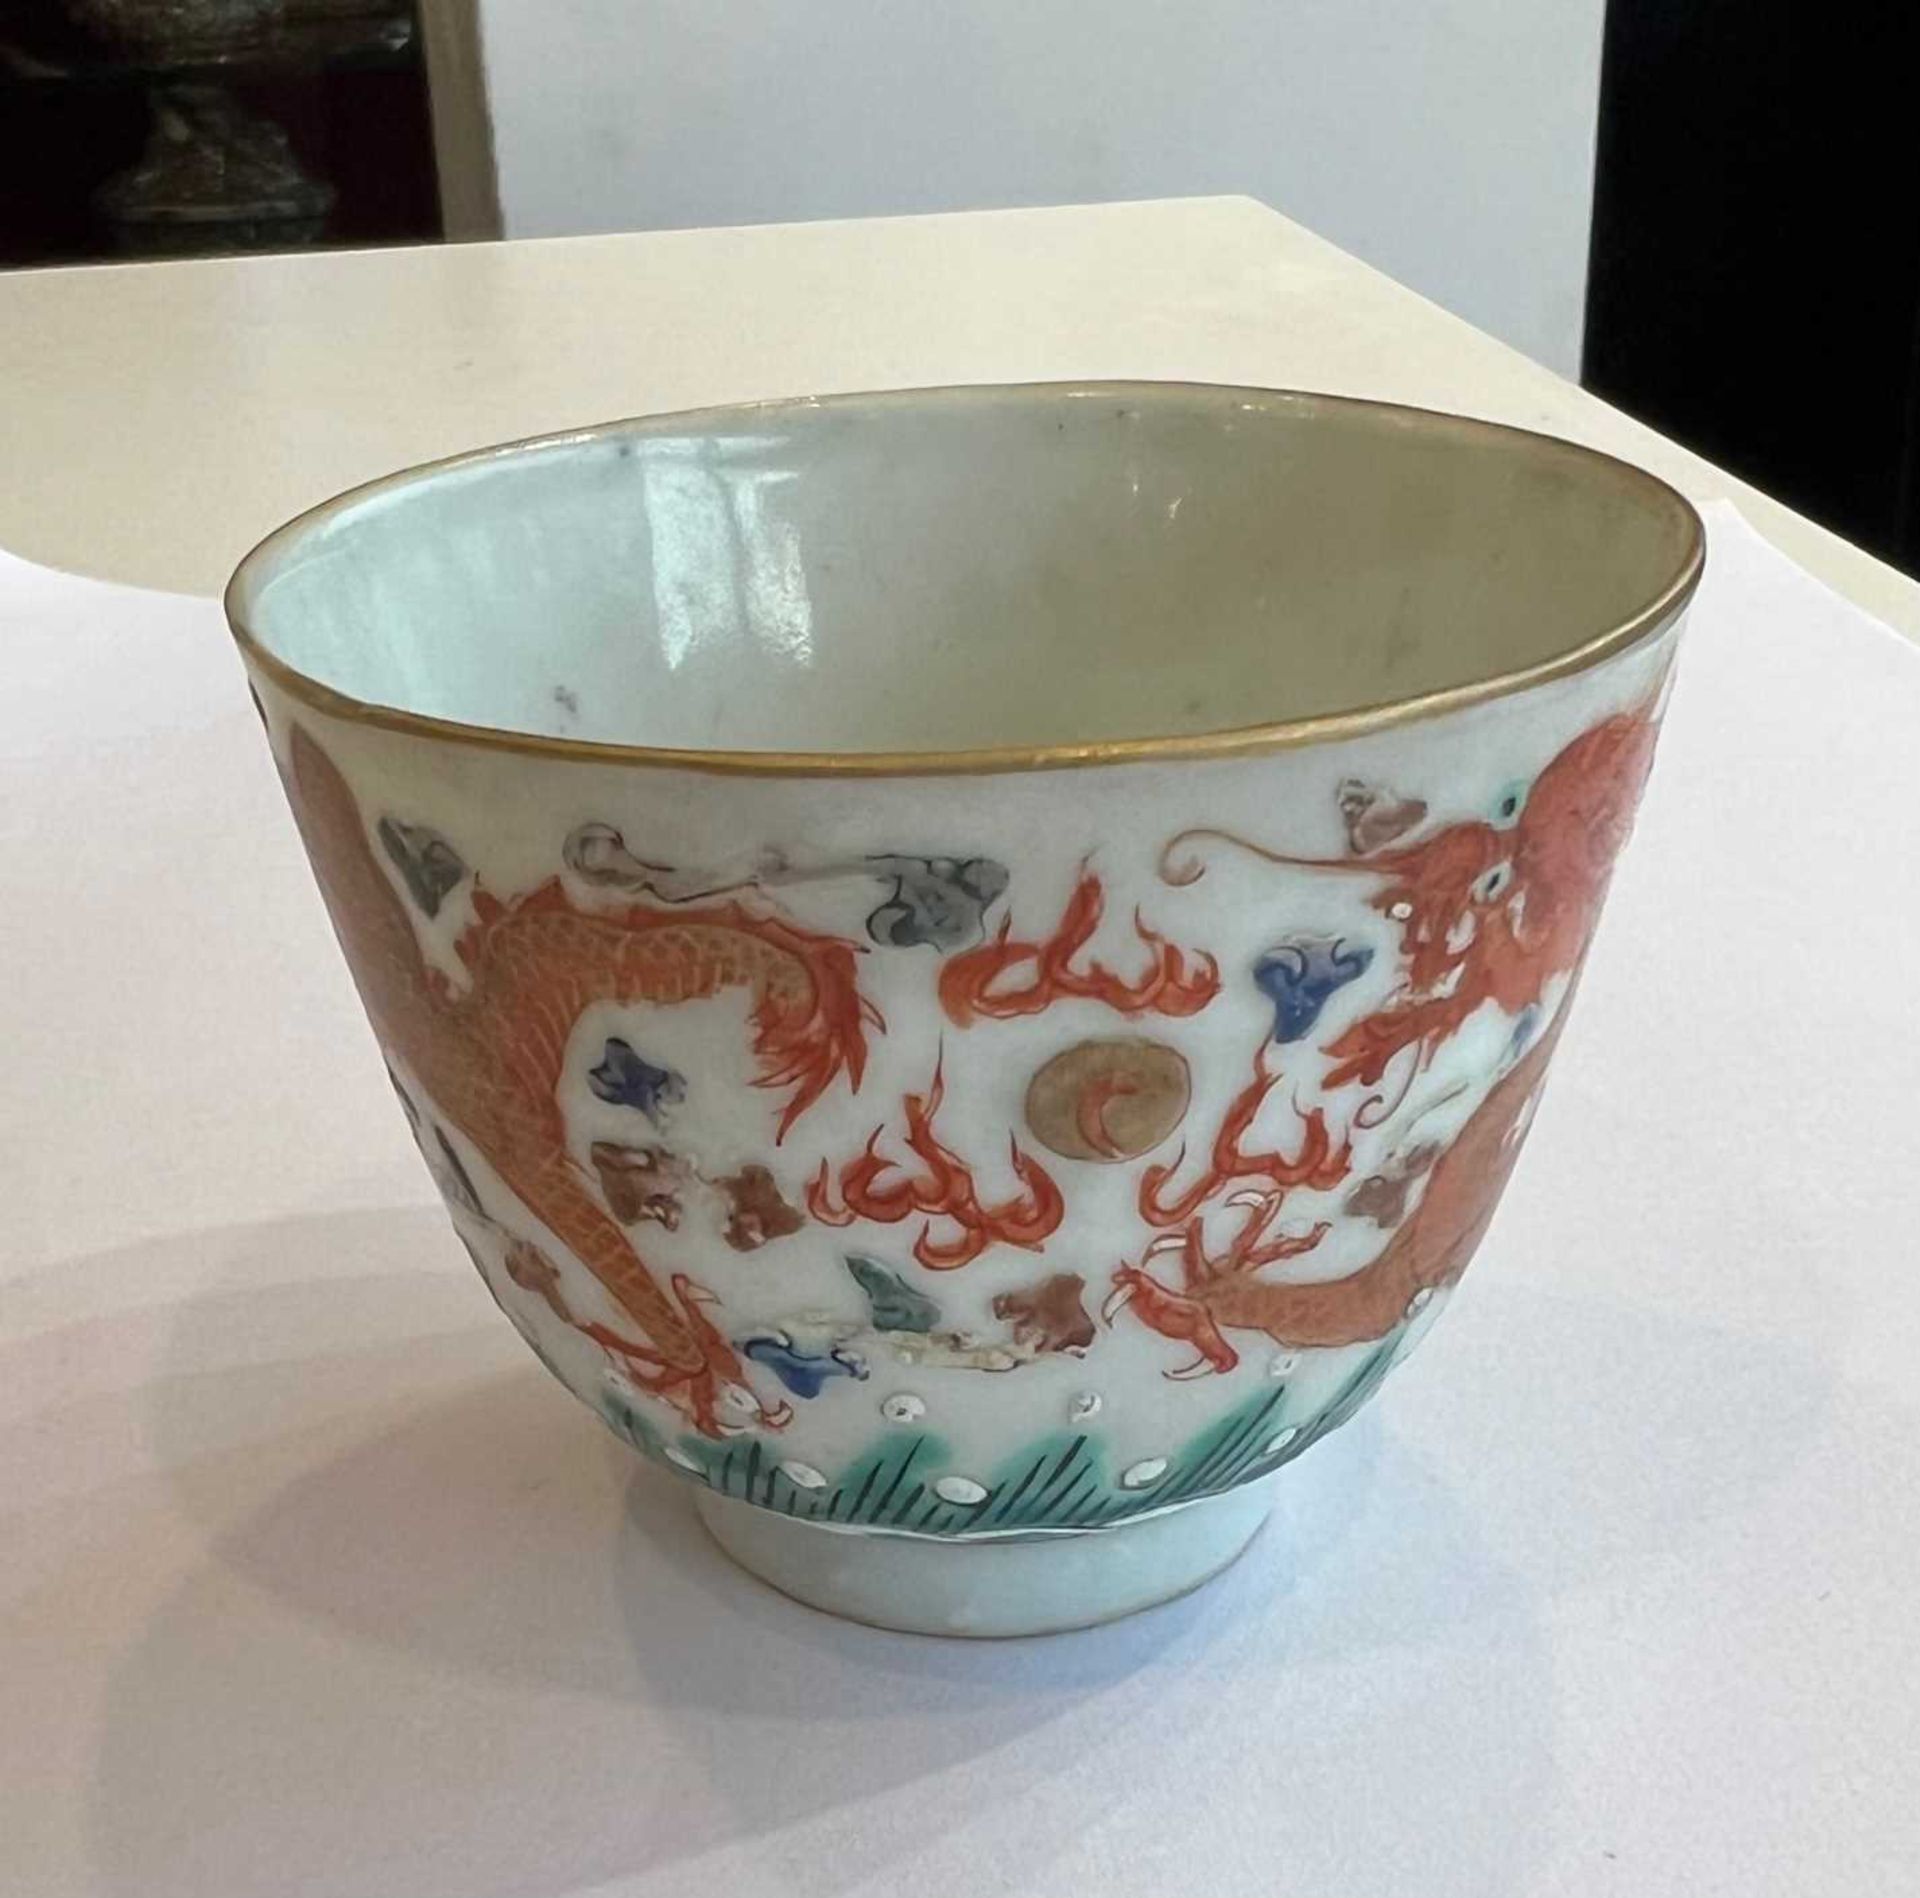 A 19TH CENTURY CHINESE GUANGXU PERIOD FAMILLE VERTE PORCELAIN WINE CUP - Image 5 of 11